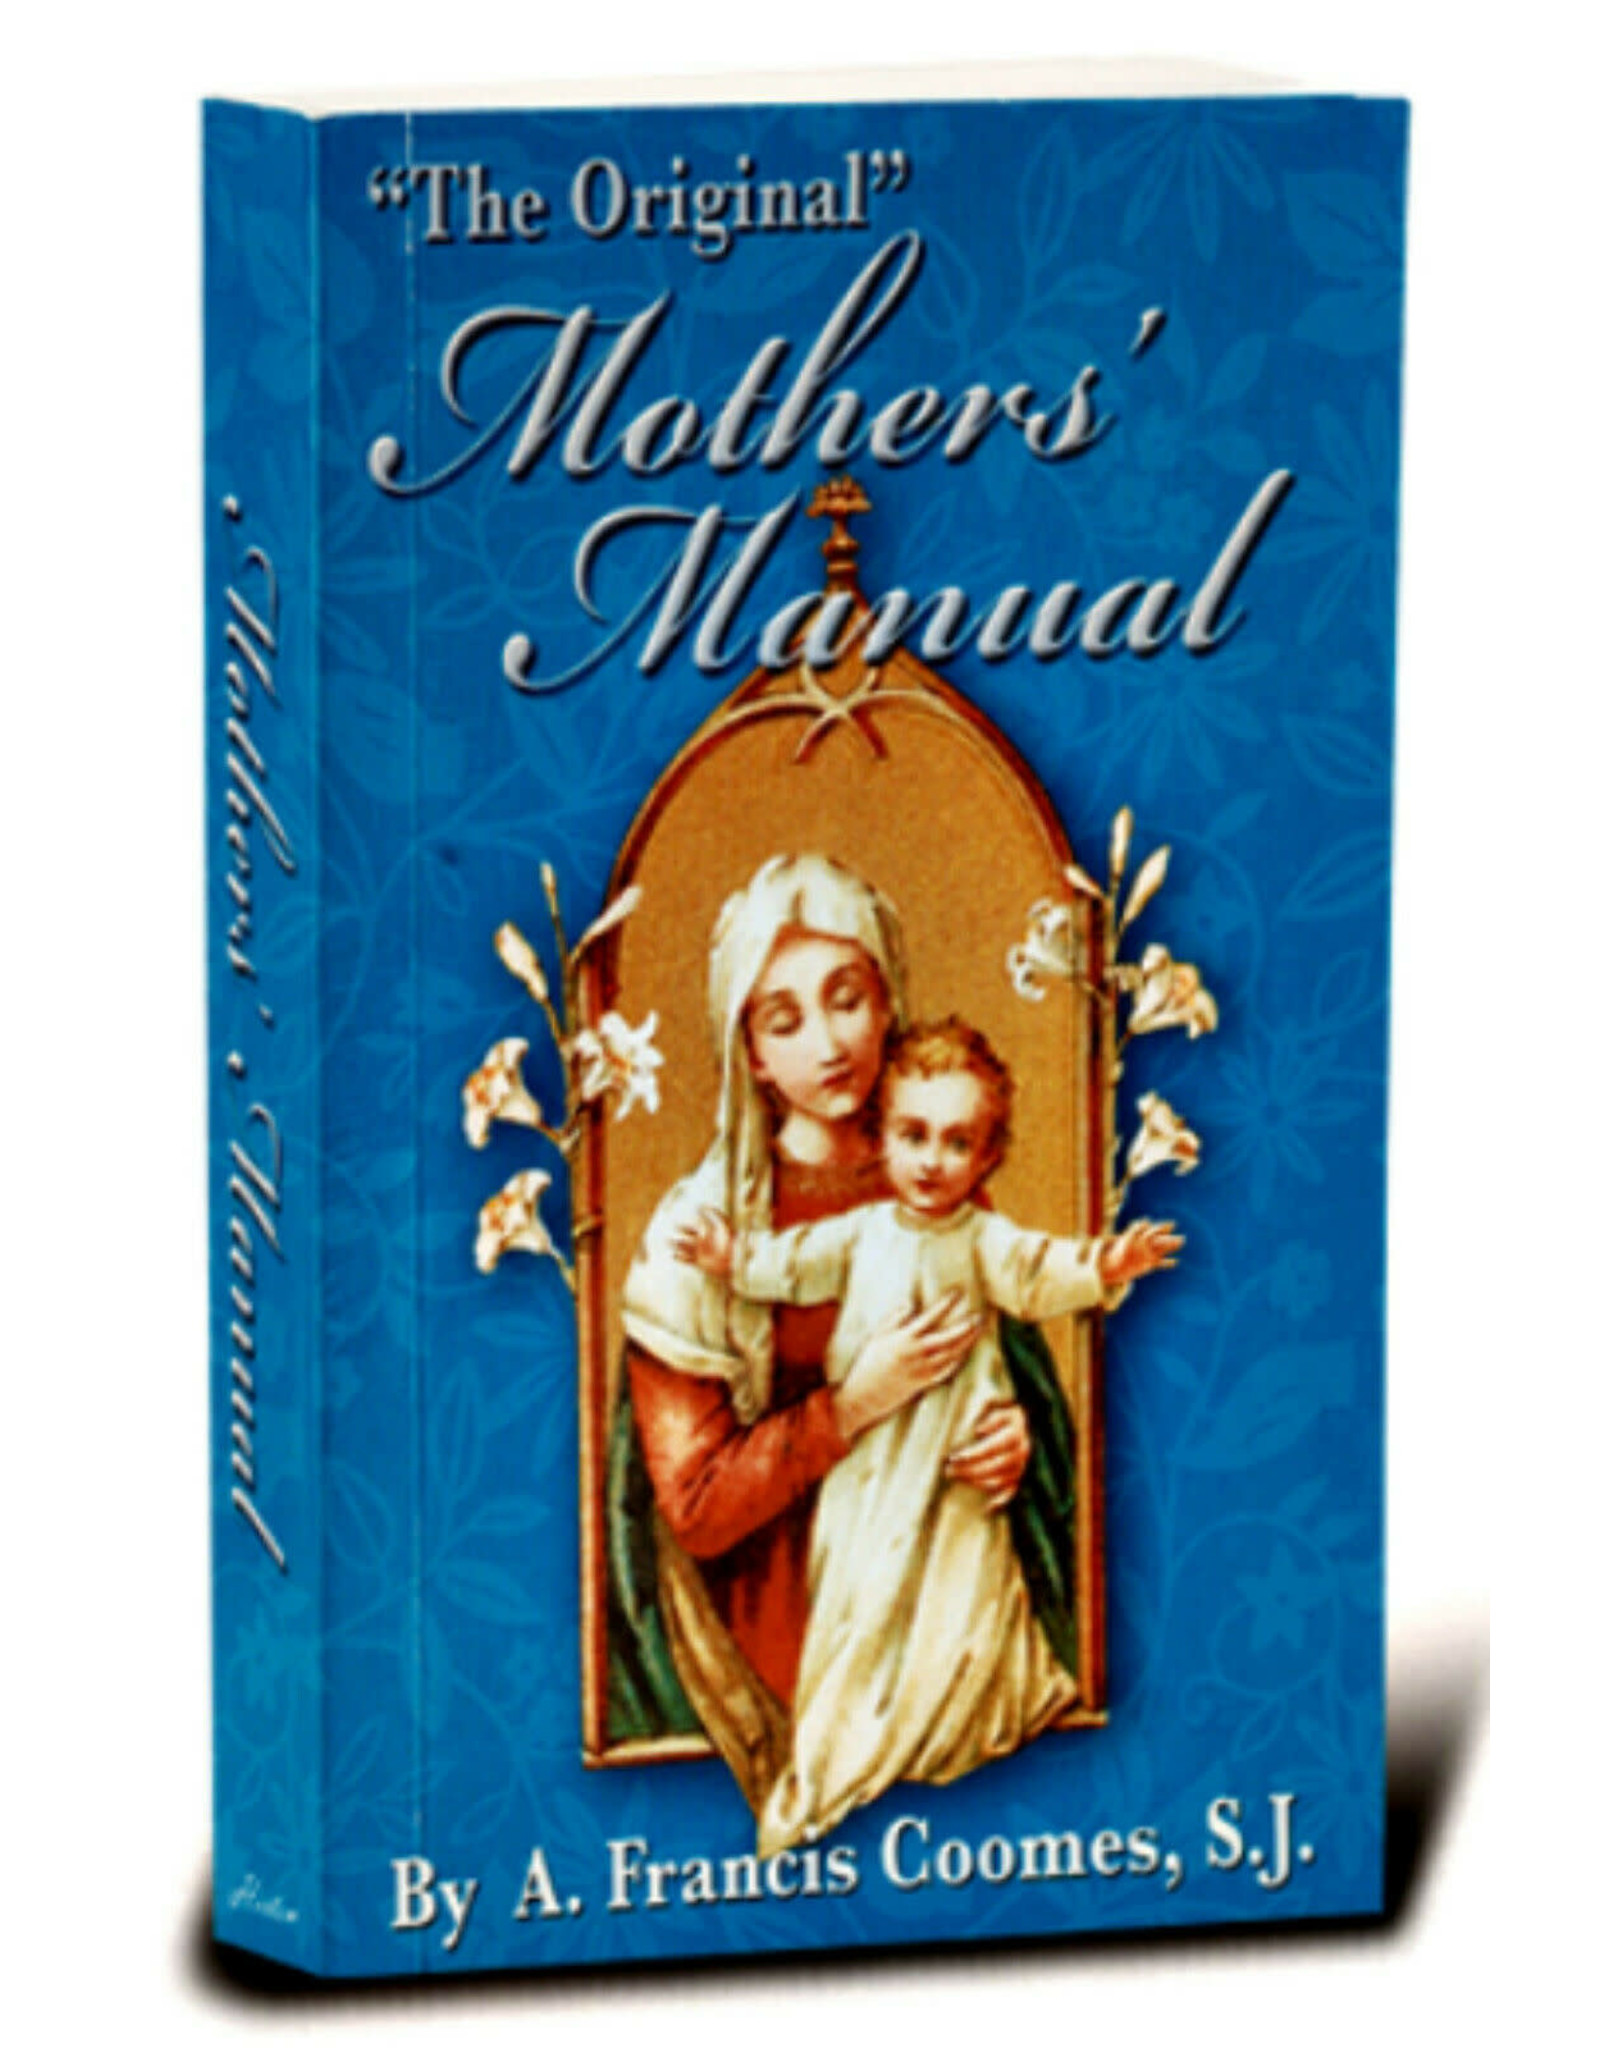 Hirten "The Original" Mother's Manual by A. Francis Coomes, S.J.